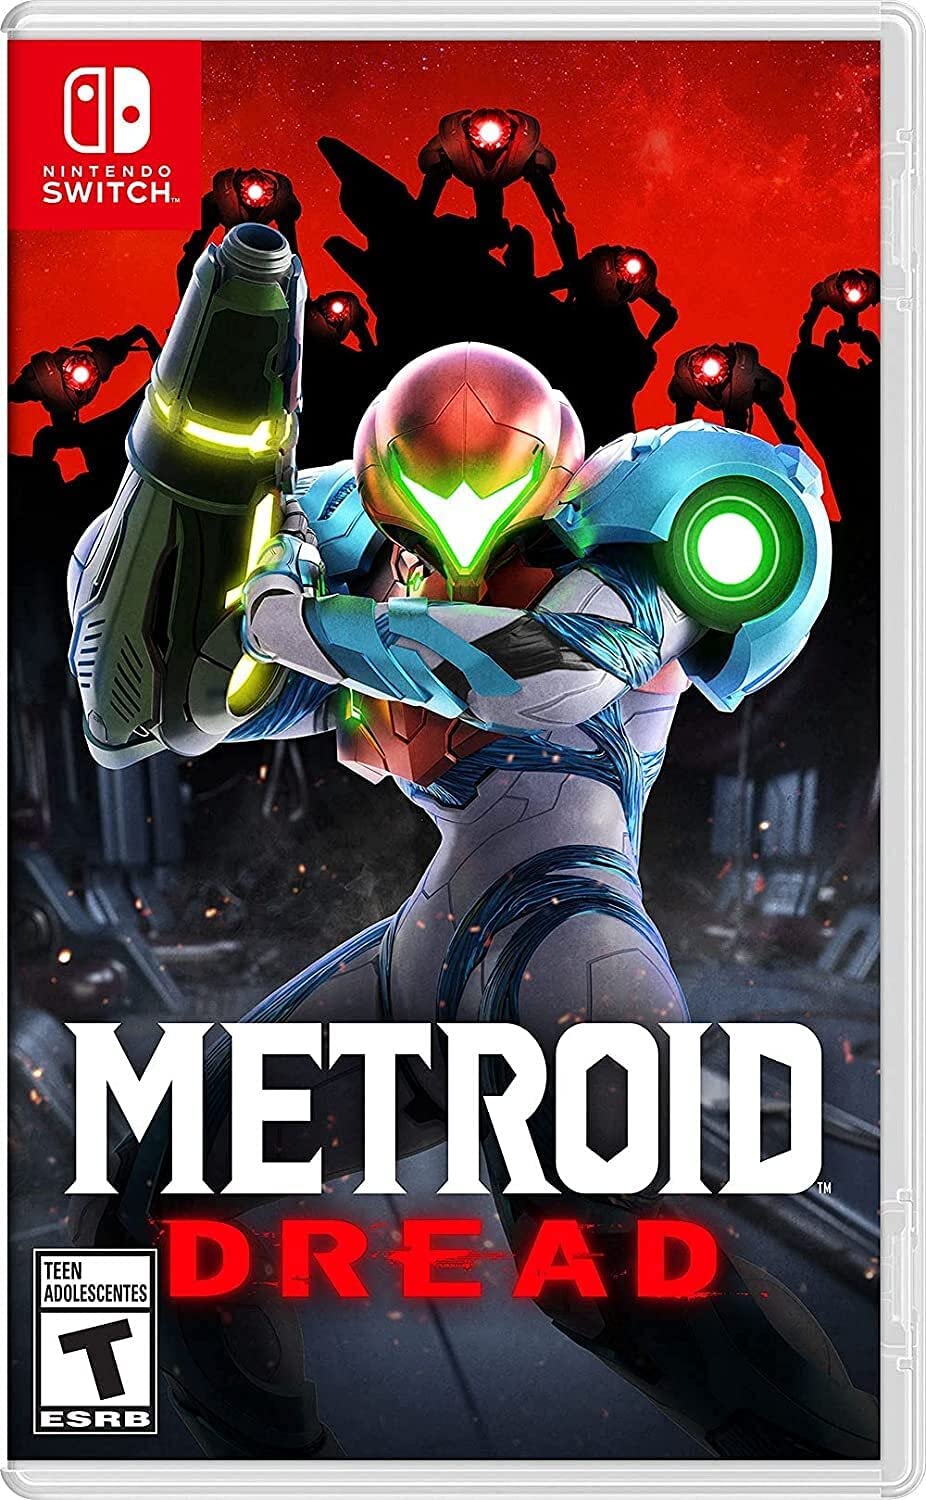 Metroid Dread For Nintendo Switch - Level UpNintendoSwitch Video Games5.05E+12